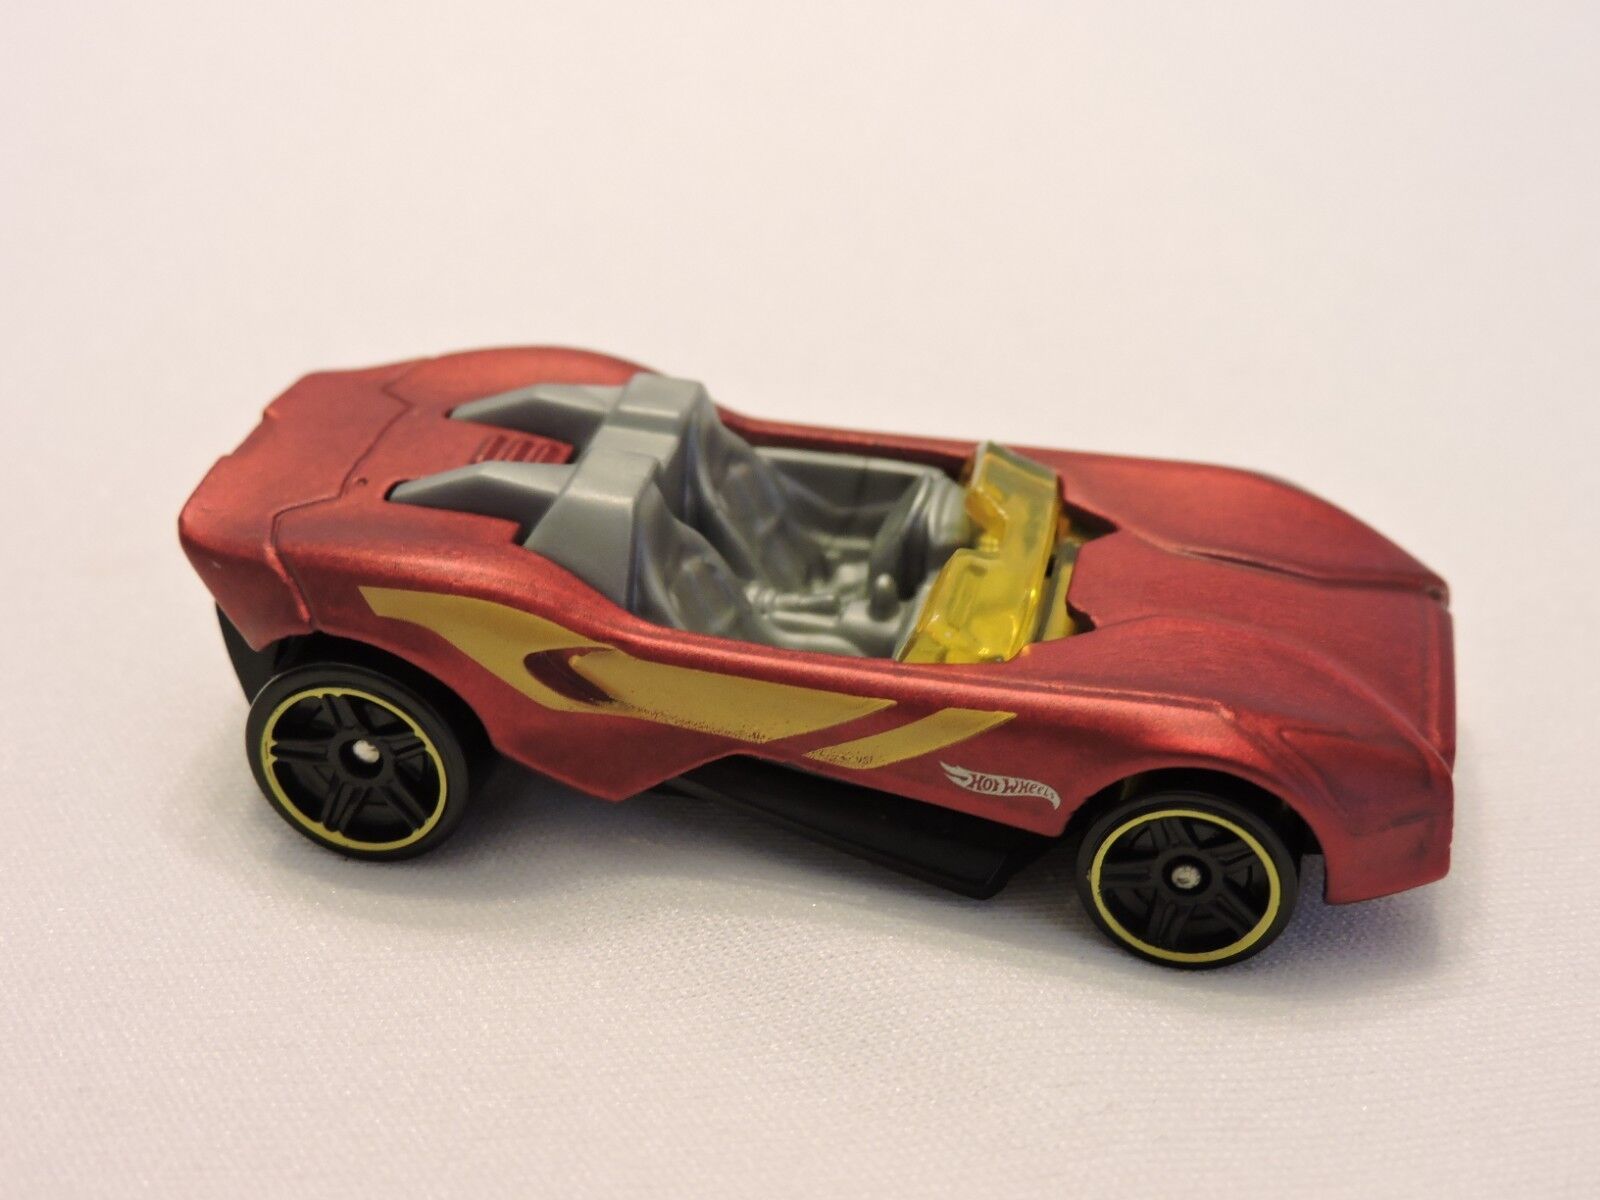 Primary image for 2014 Hot Wheels HW Off-Road Car 104/250 Carbonic Red Satin Mattel Loose